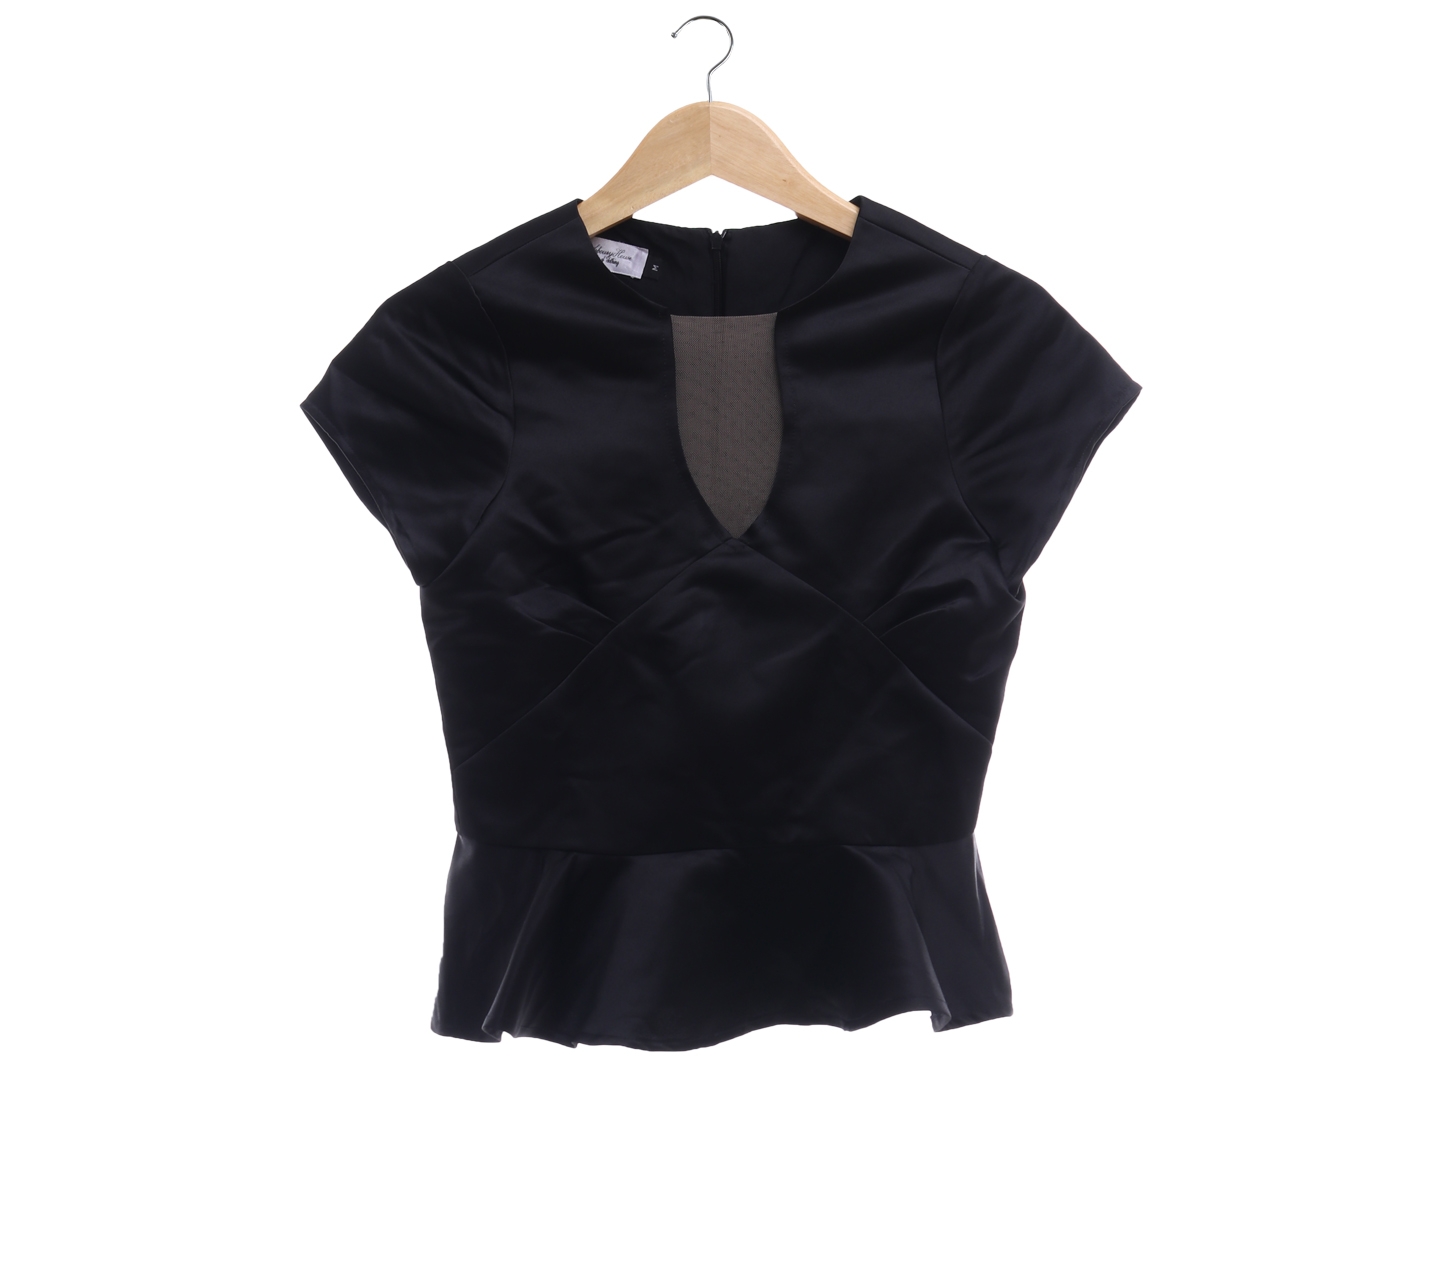 Arboury House Of Clothing Black Blouse